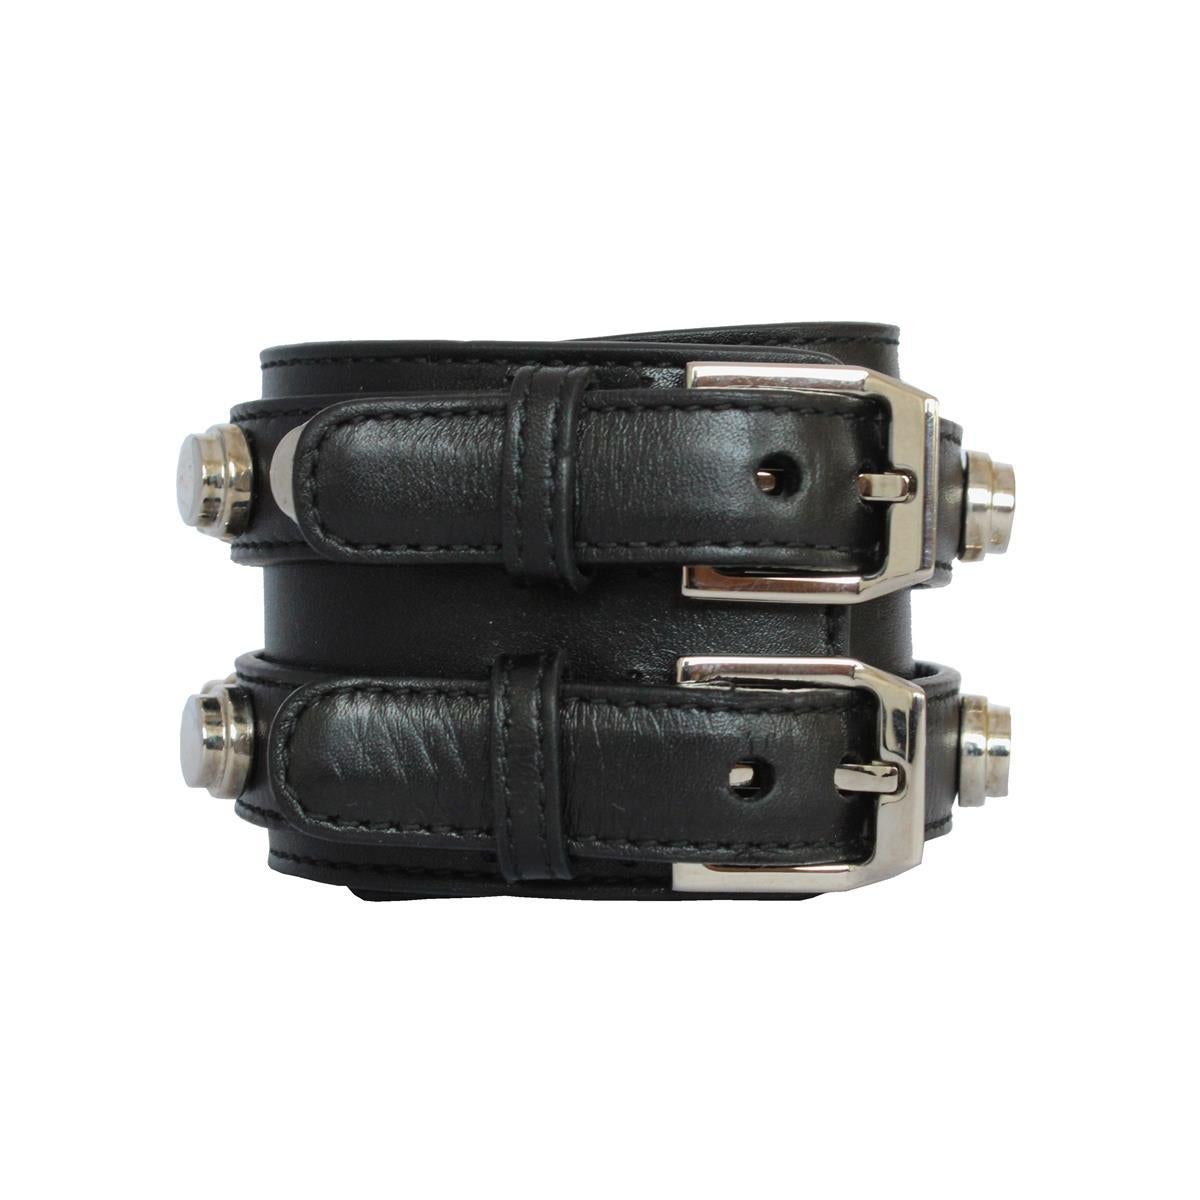 Leather
Black color
Metal studs
Double buckle
Length cm 5 (1.96 inches)
Width cm 26 (10.2 inches)
Free express international shipping !